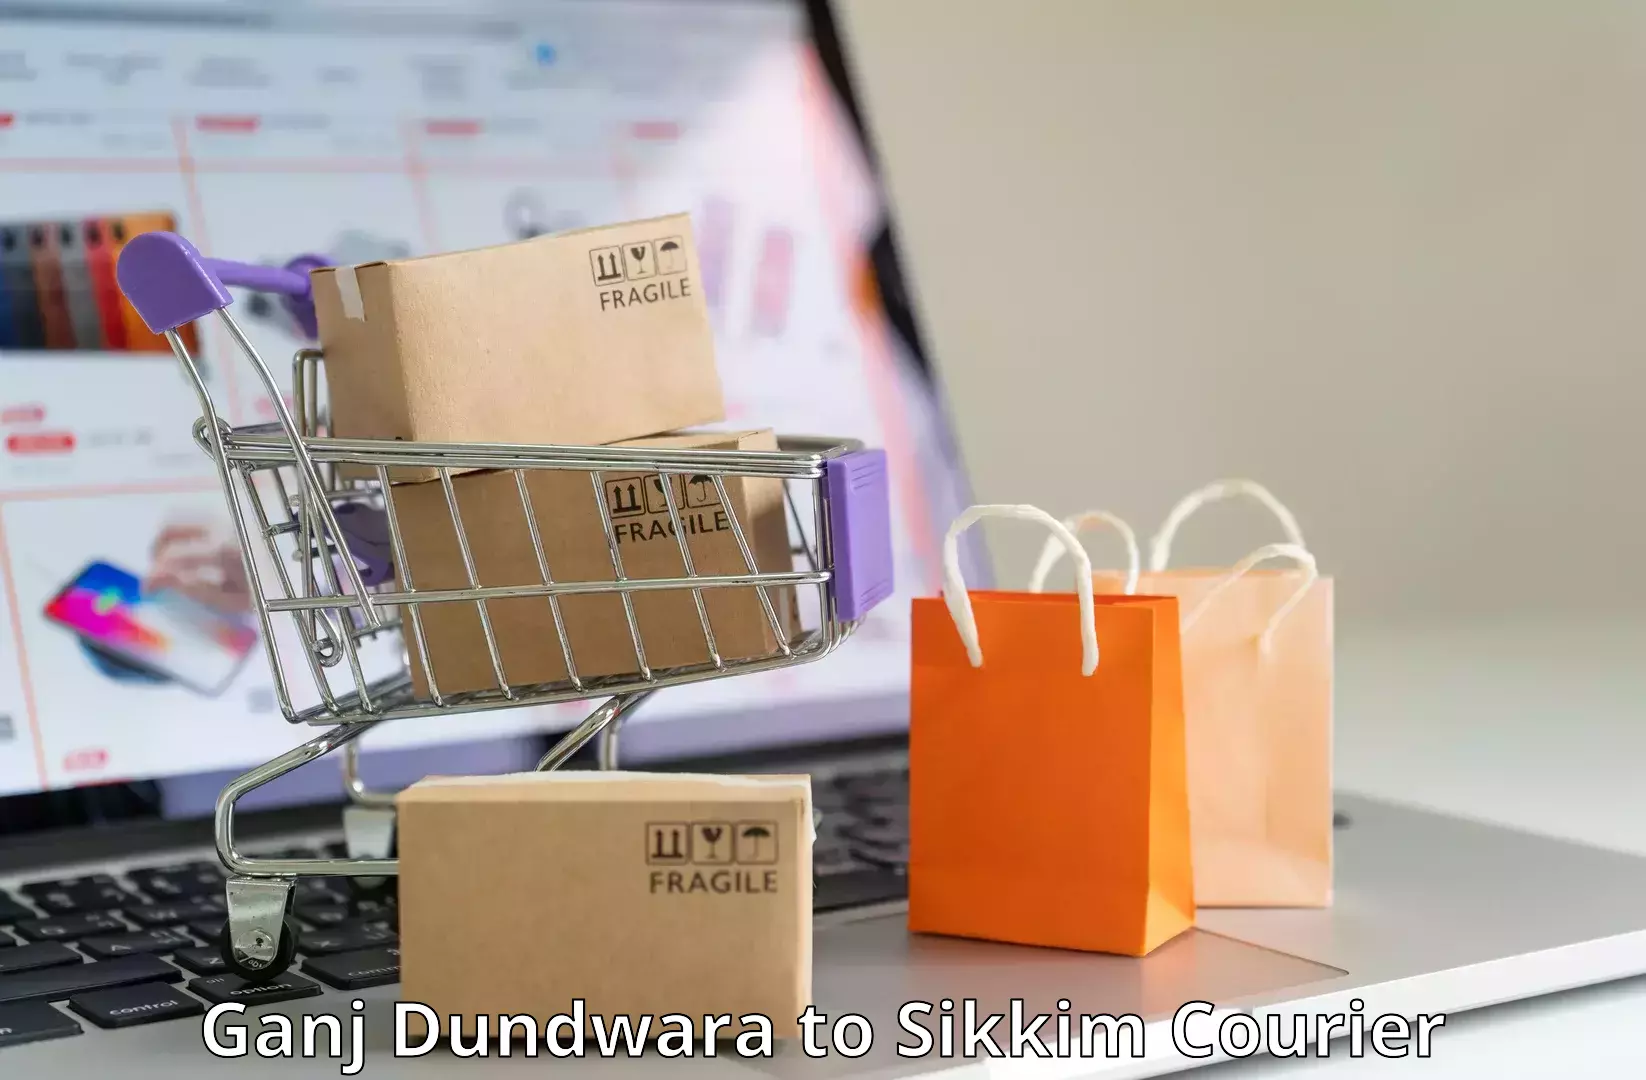 Overnight delivery services Ganj Dundwara to Rangpo